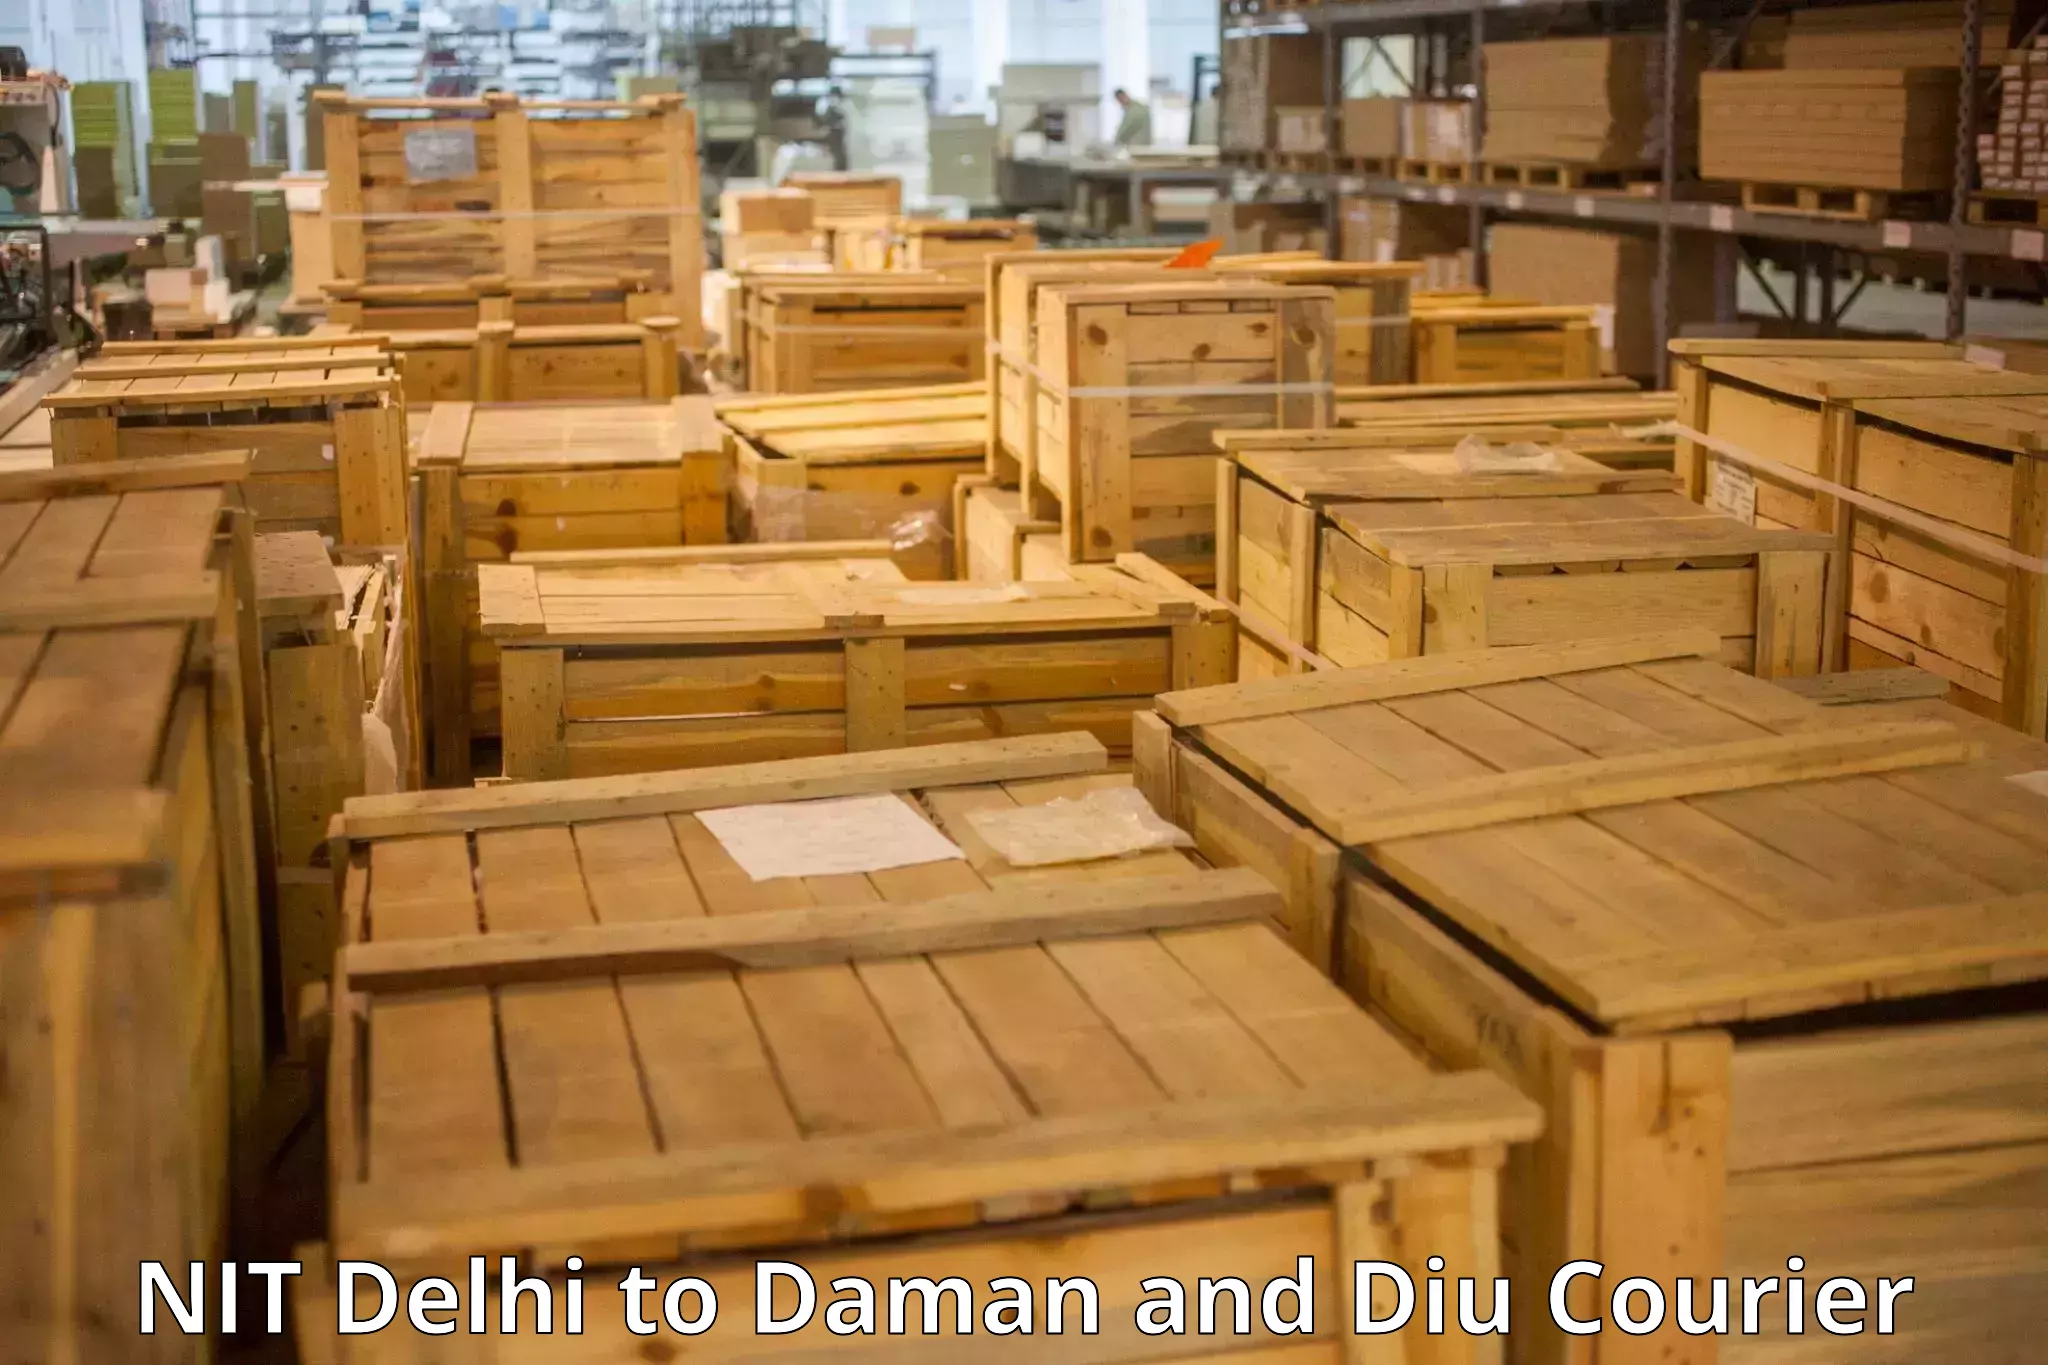 Personal effects shipping NIT Delhi to Daman